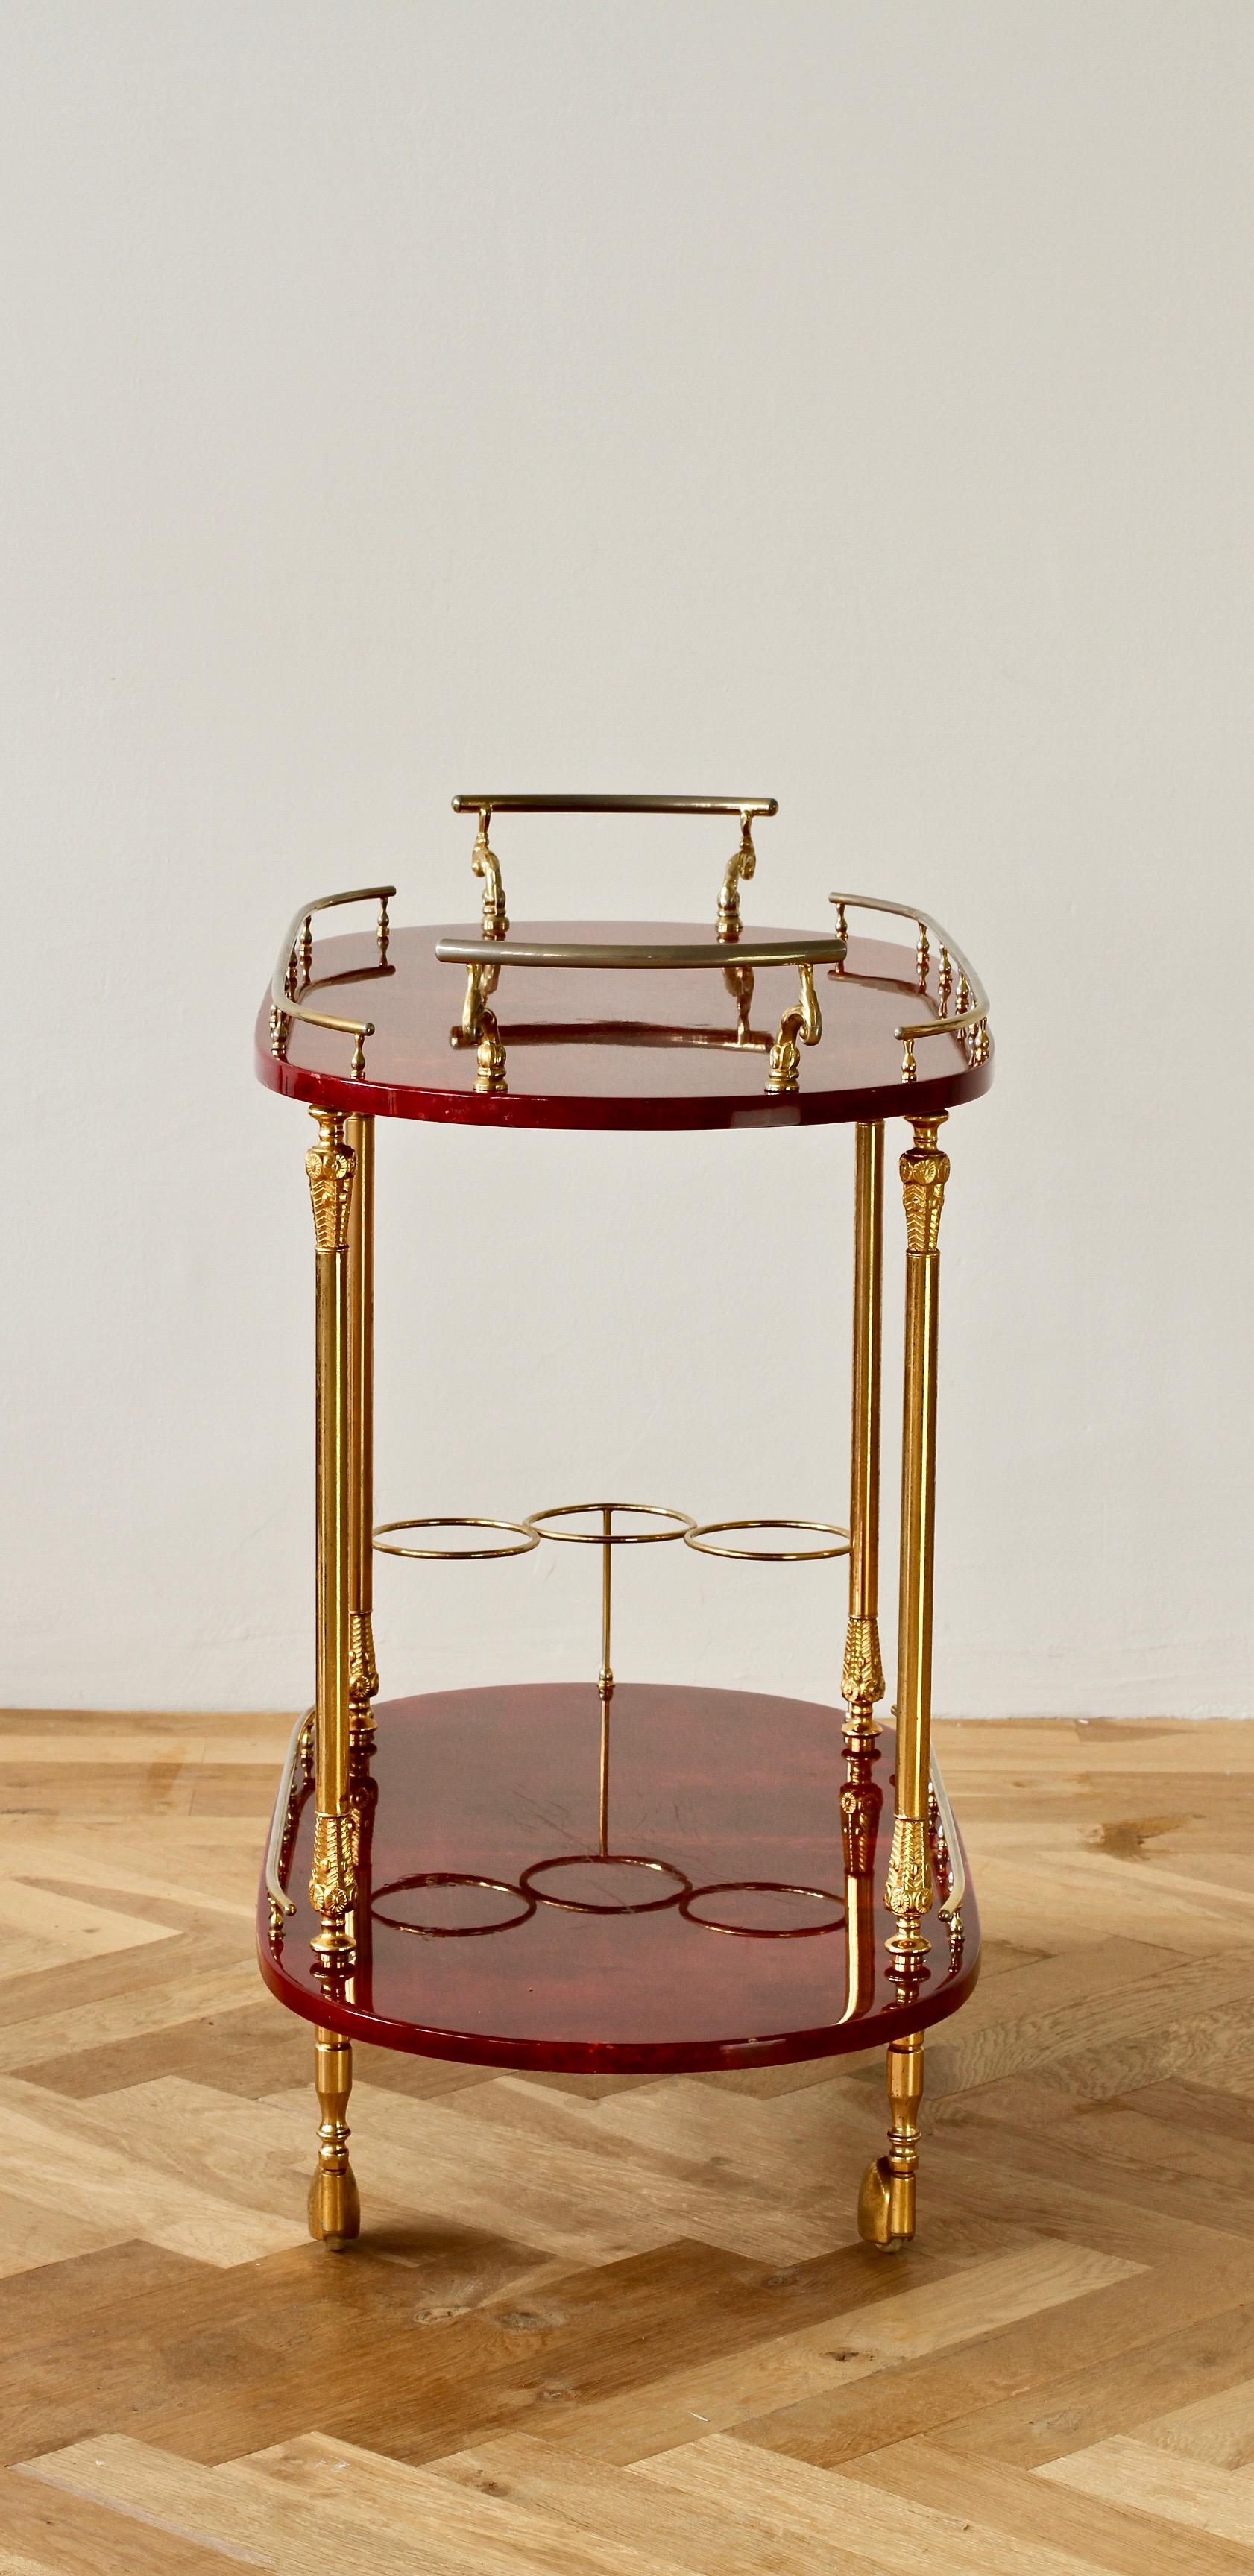 Dyed Aldo Tura 1950s Midcentury Bar Cart, Trolley or Stand in Red Italian Goatskin